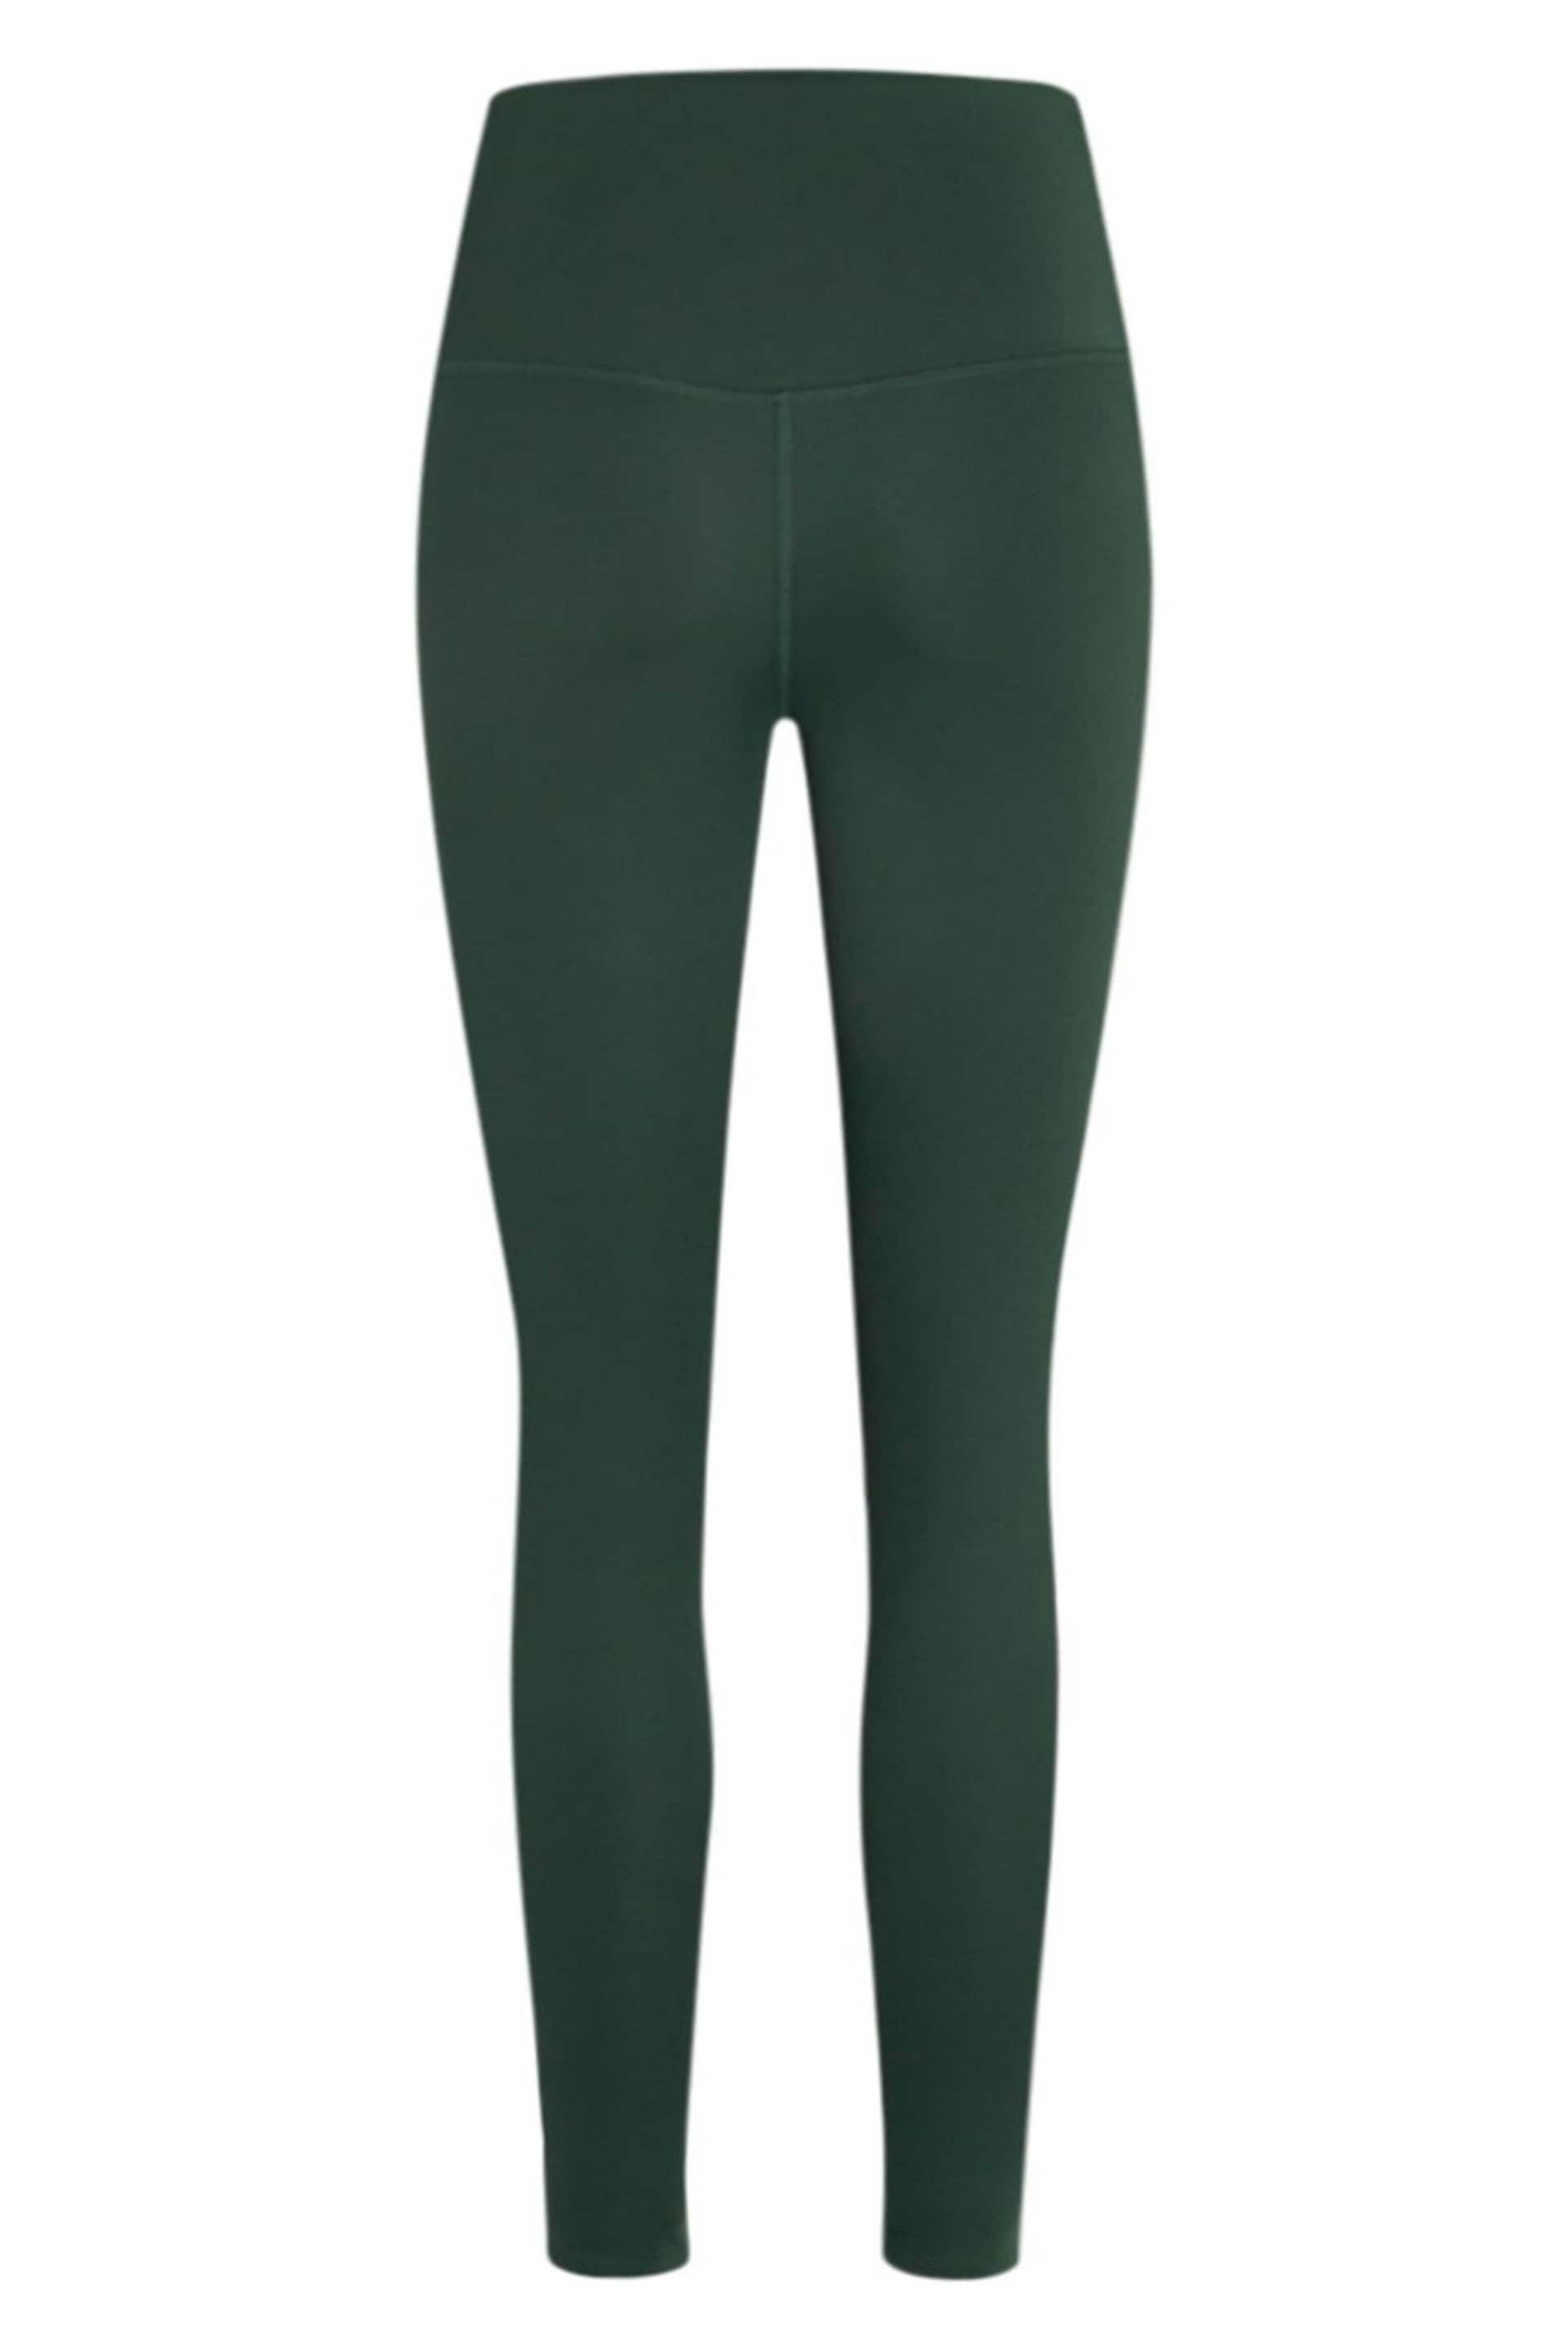 Girlfriend Collective High Rise Pocket Leggings - Image 9 of 10